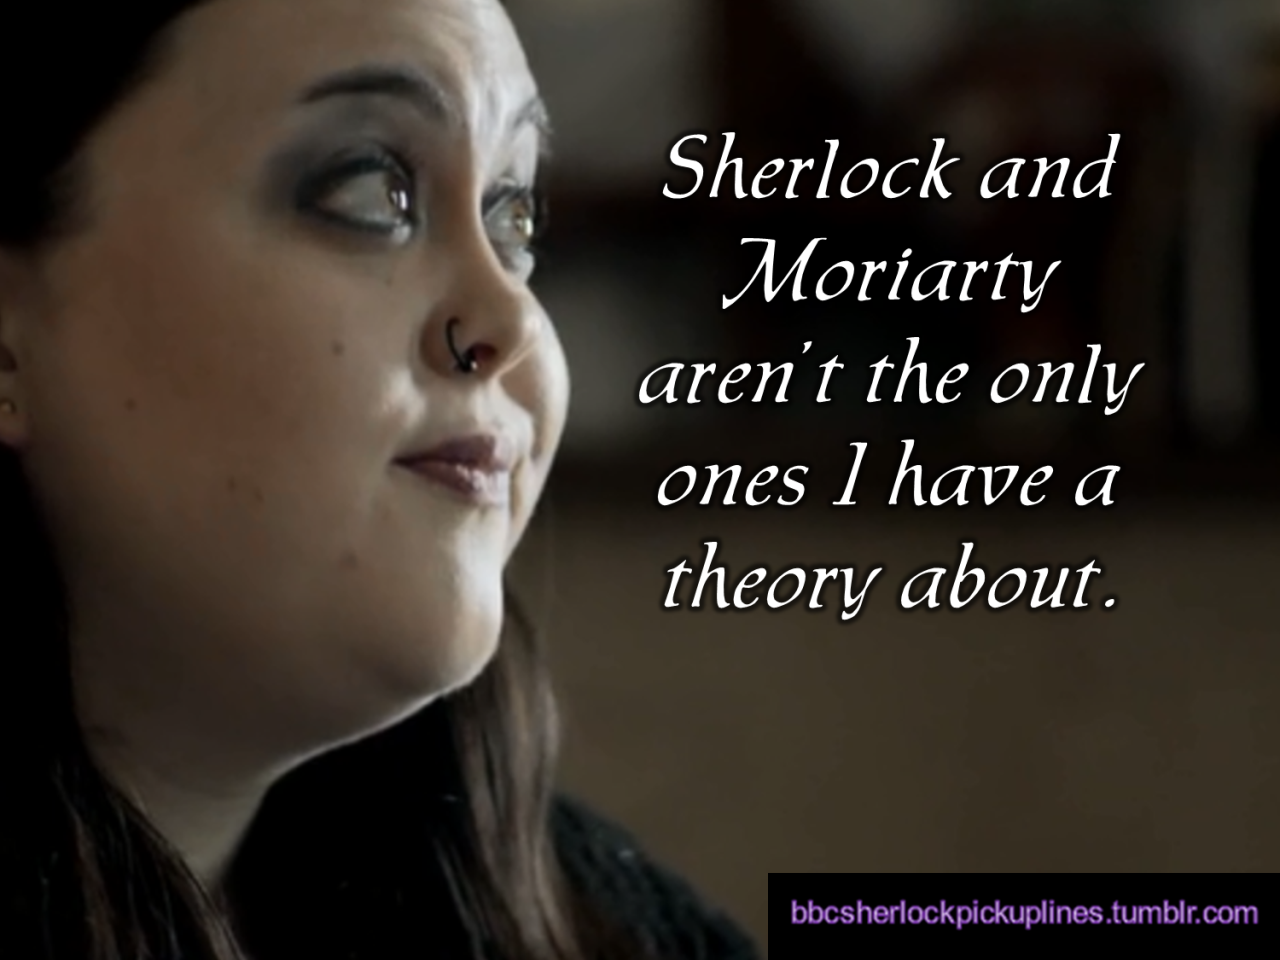 &ldquo;Sherlock and Moriarty aren&rsquo;t the only ones I have a theory about.&rdquo;